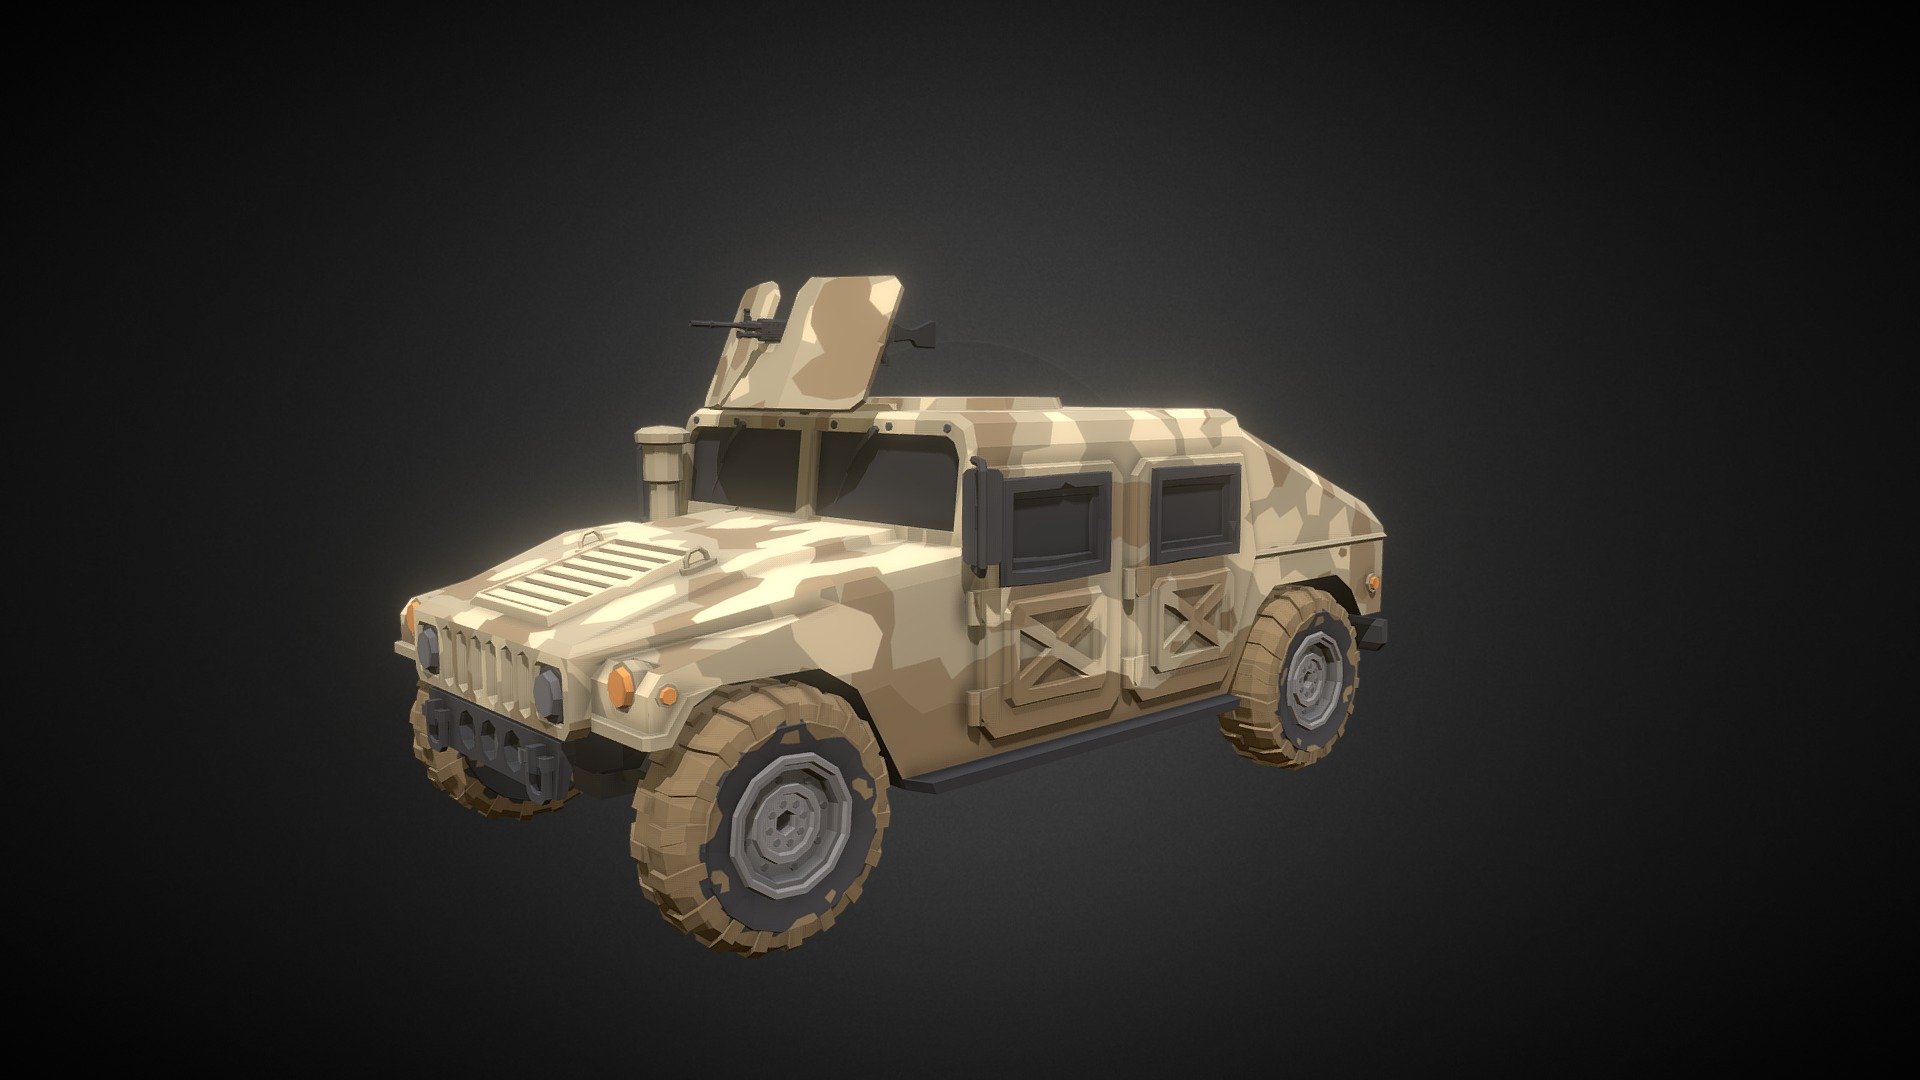 Hello World!

Armored Car is the first model from the global Military Low Poly Pack
It is perfect for complementing your game projects in any genre 3d model